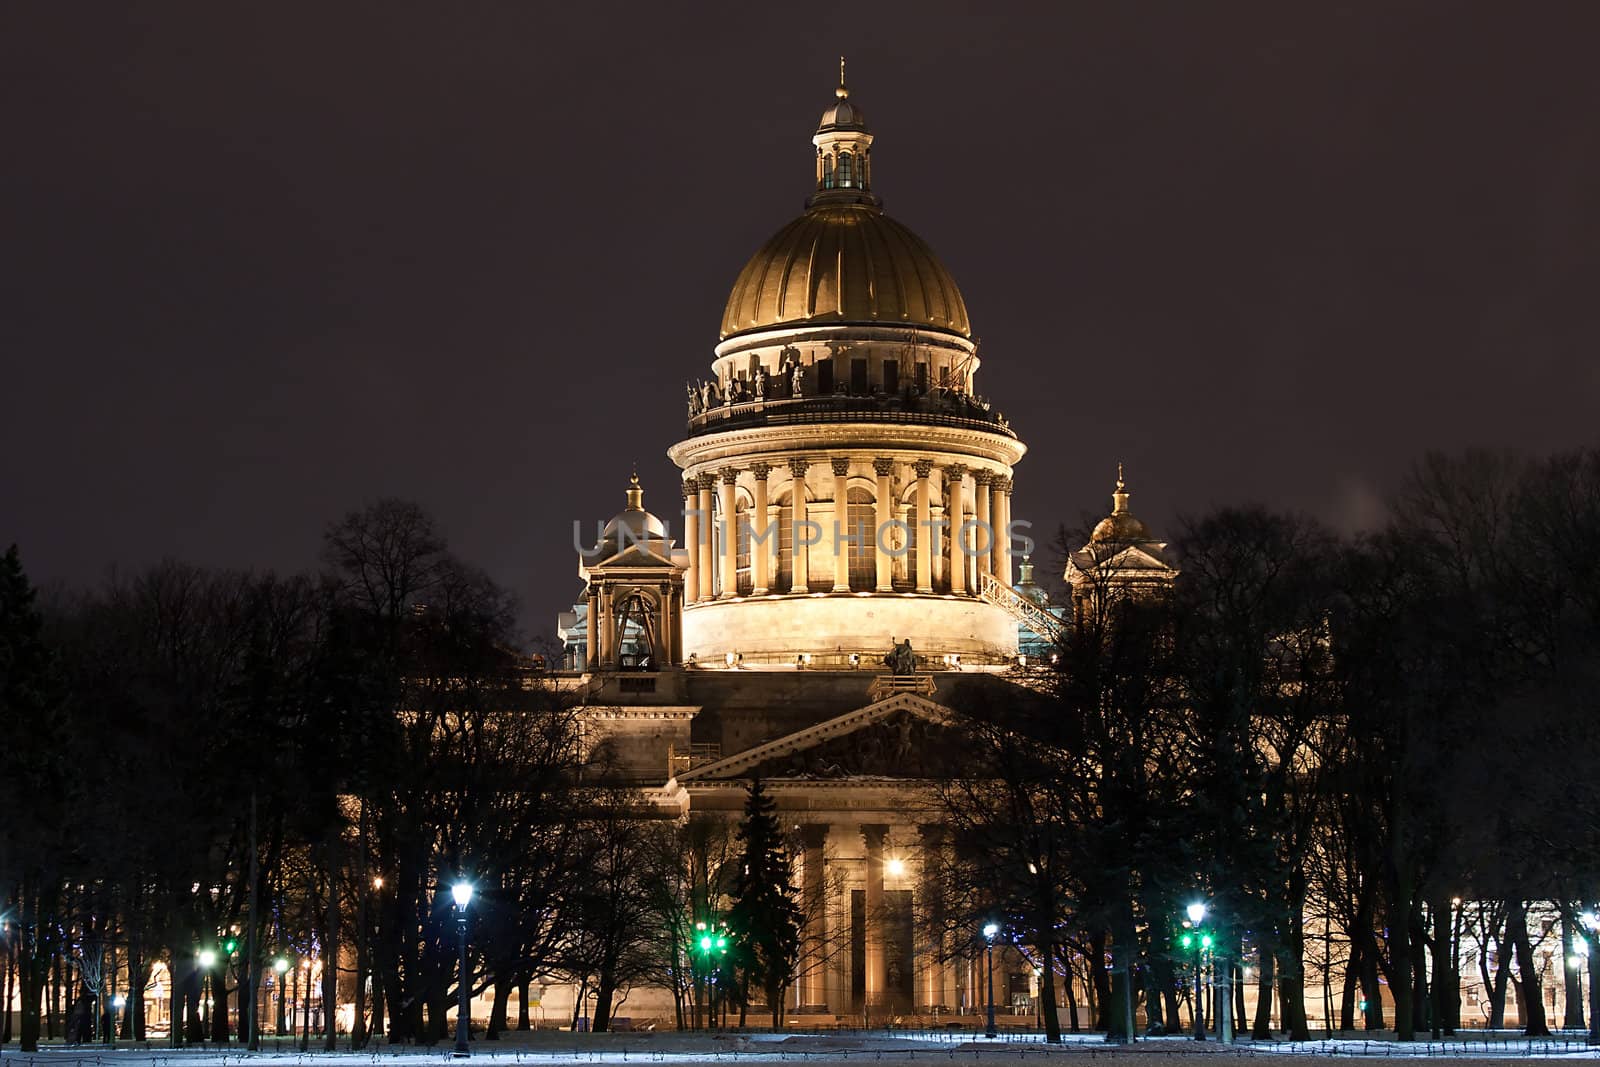 night horizontal view of St. Isaac's Cathedral in Saint Petersburg, Russia